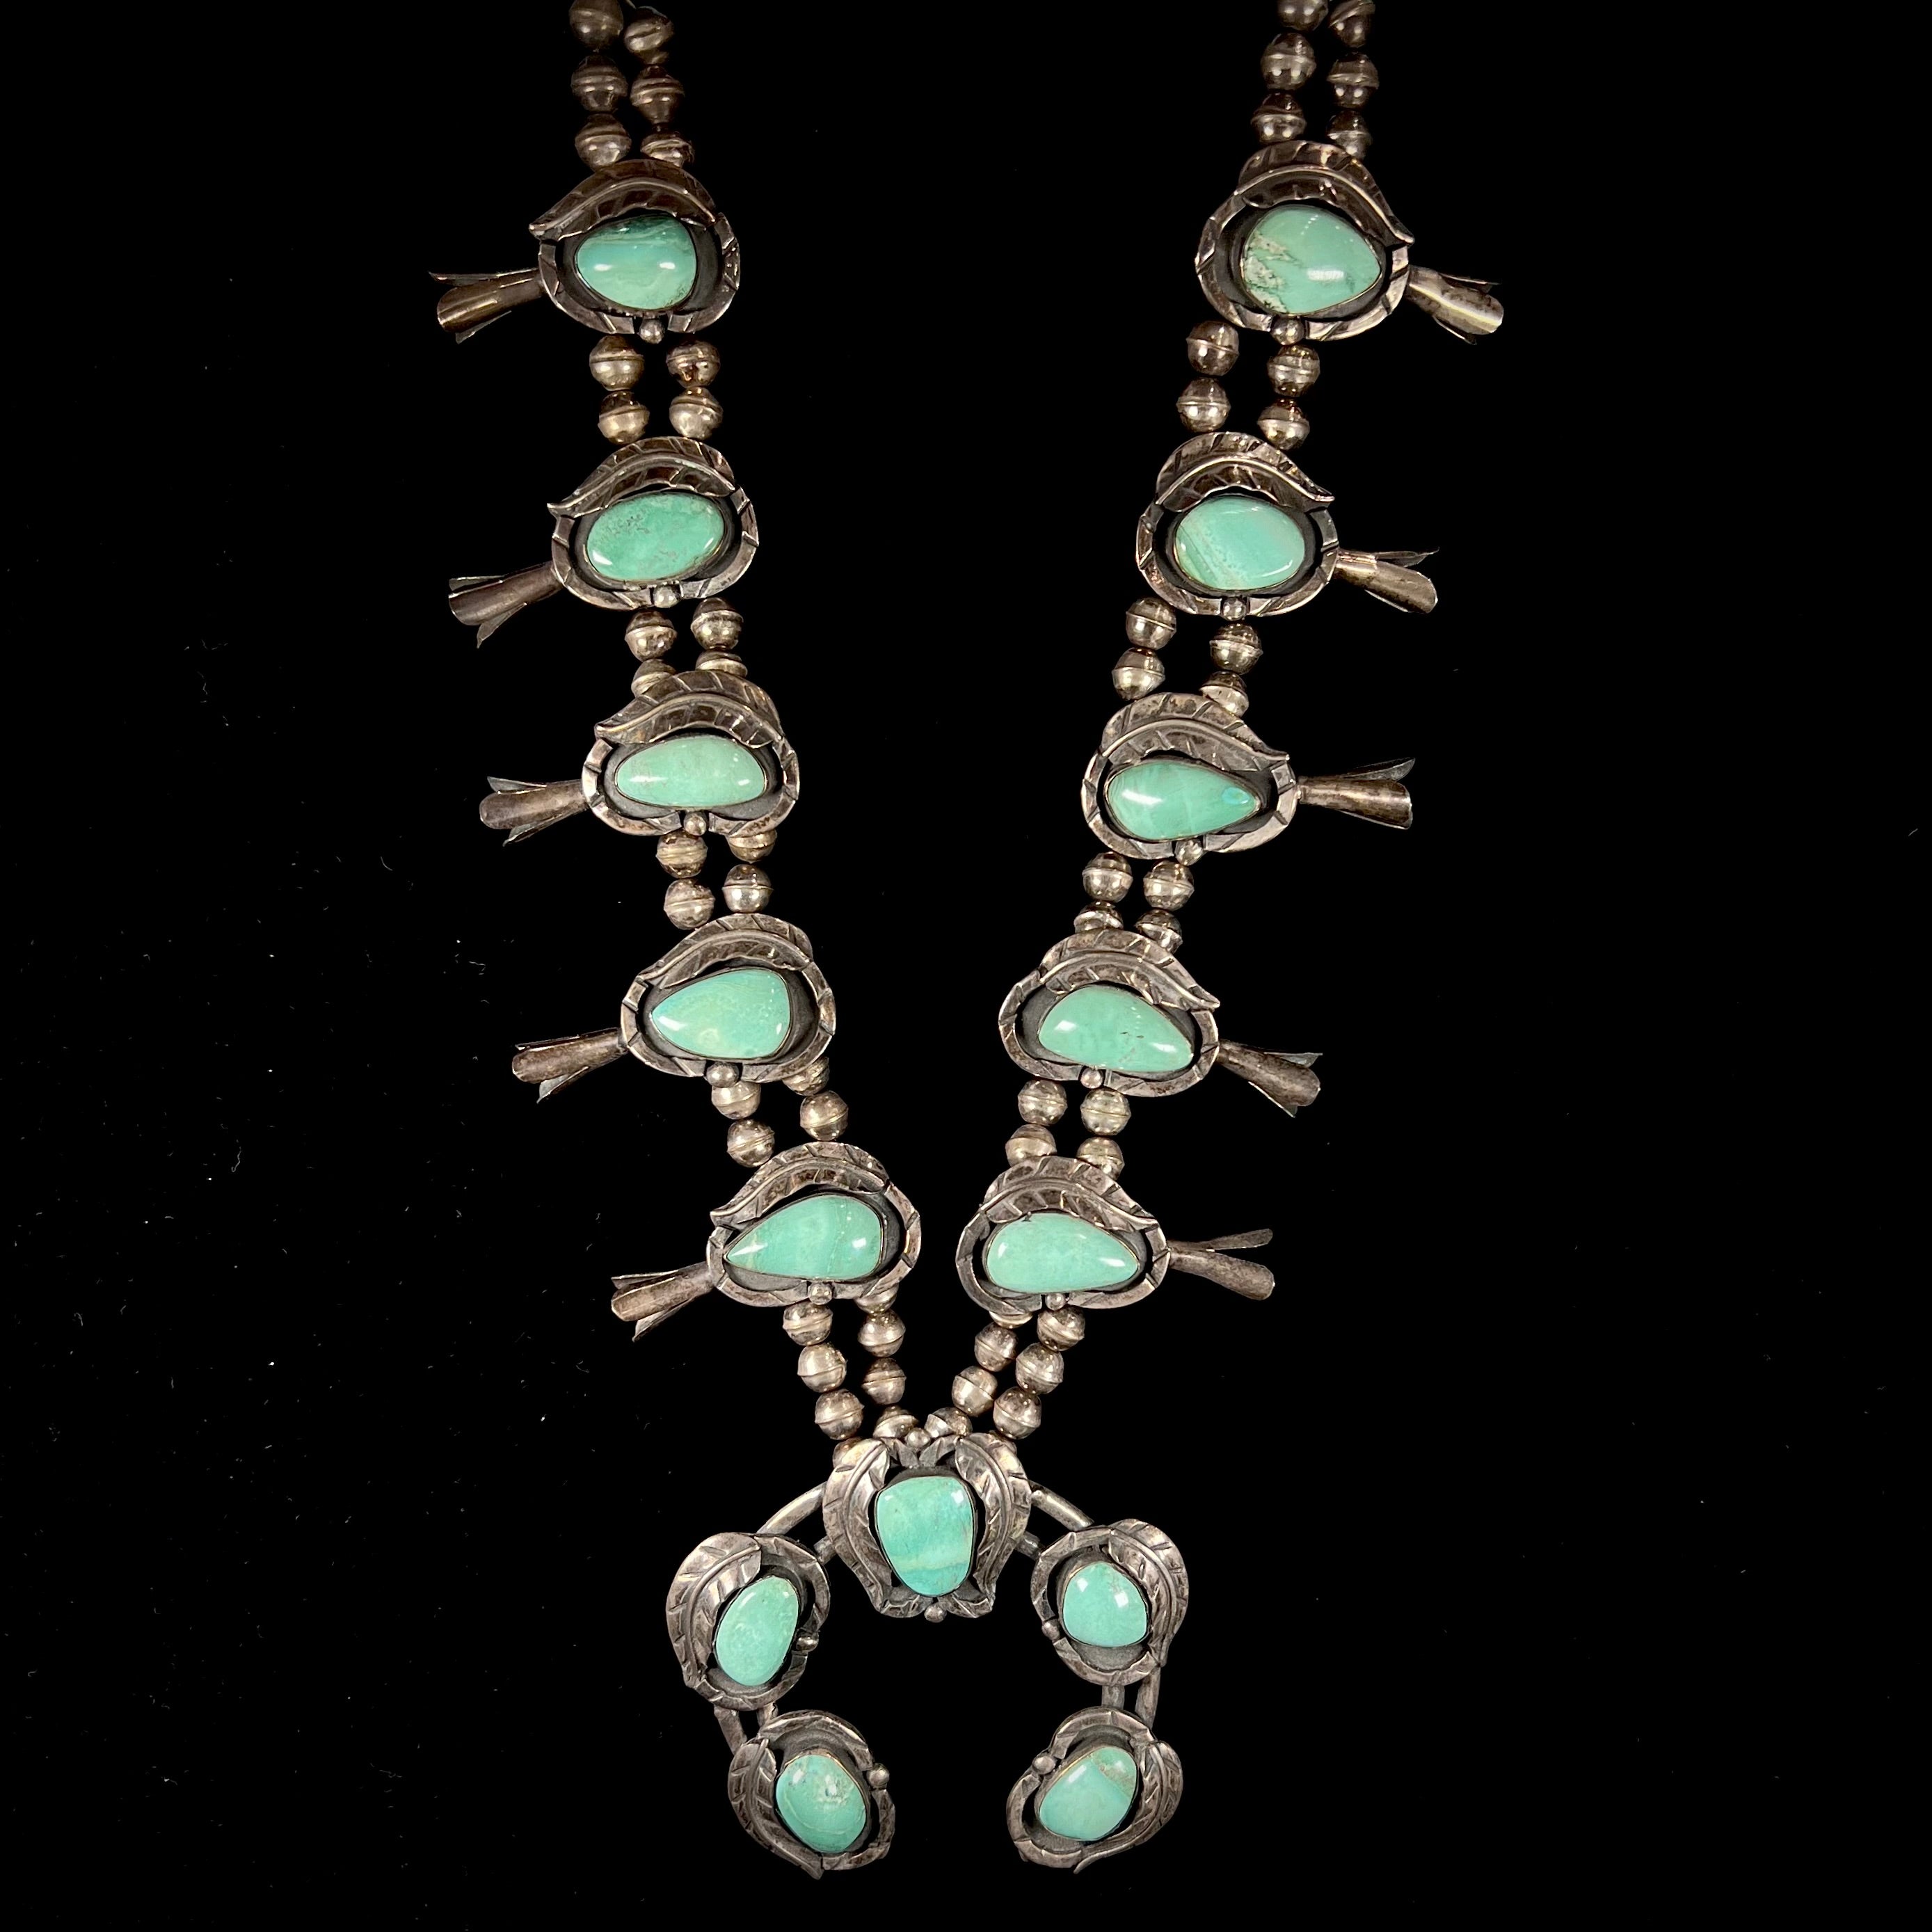 Turquoise Beads from Mexico - Sonoran Green Turquoise